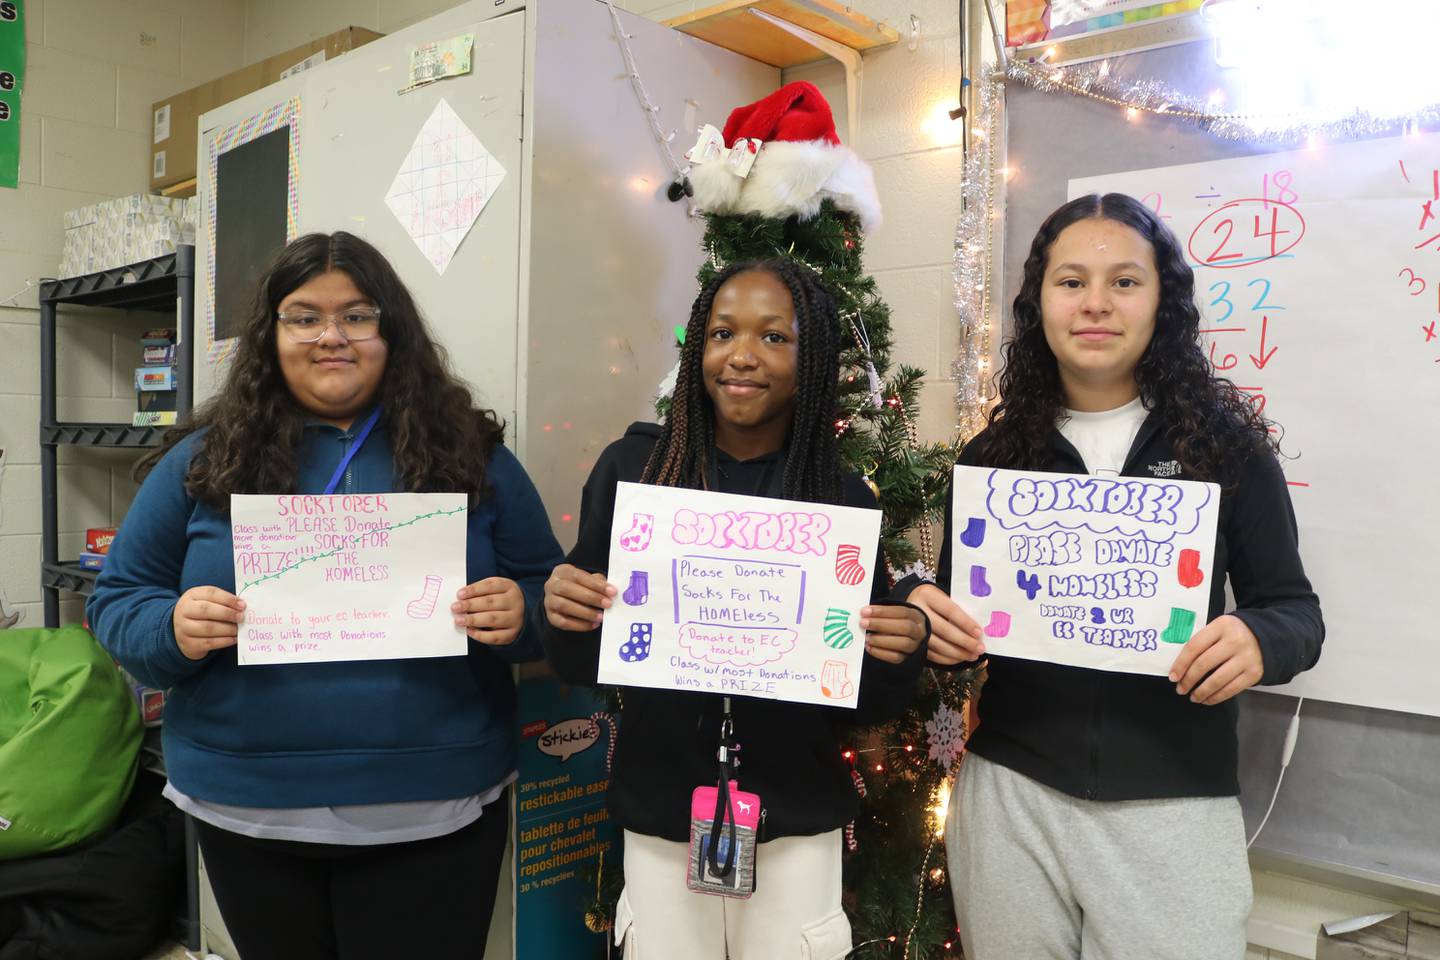 Hufford students Alejandra Ramirez, Leah Collins, and Jimena Ulloa made signs to encourage their classmates and teachers to donate socks.